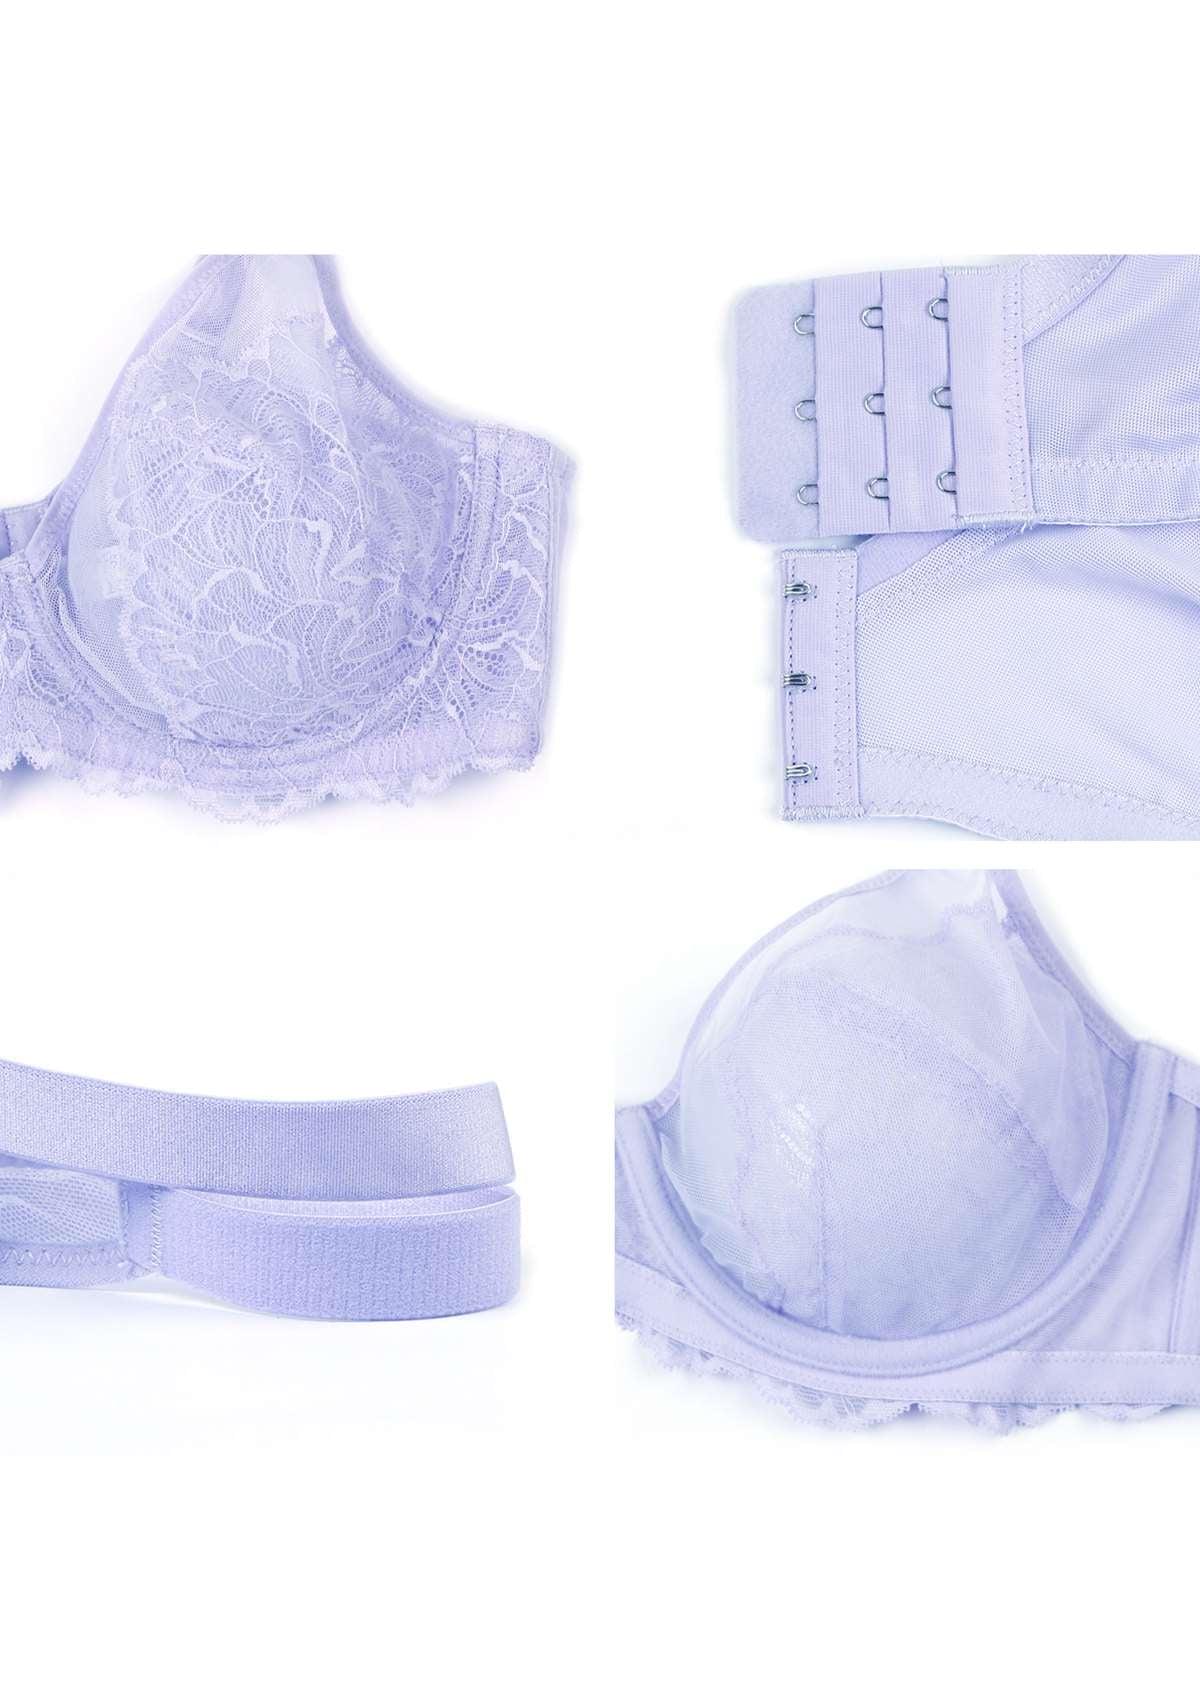 HSIA Blossom Transparent Lace Bra: Plus Size Wired Back Smoothing Bra - Light Purple / 42 / C